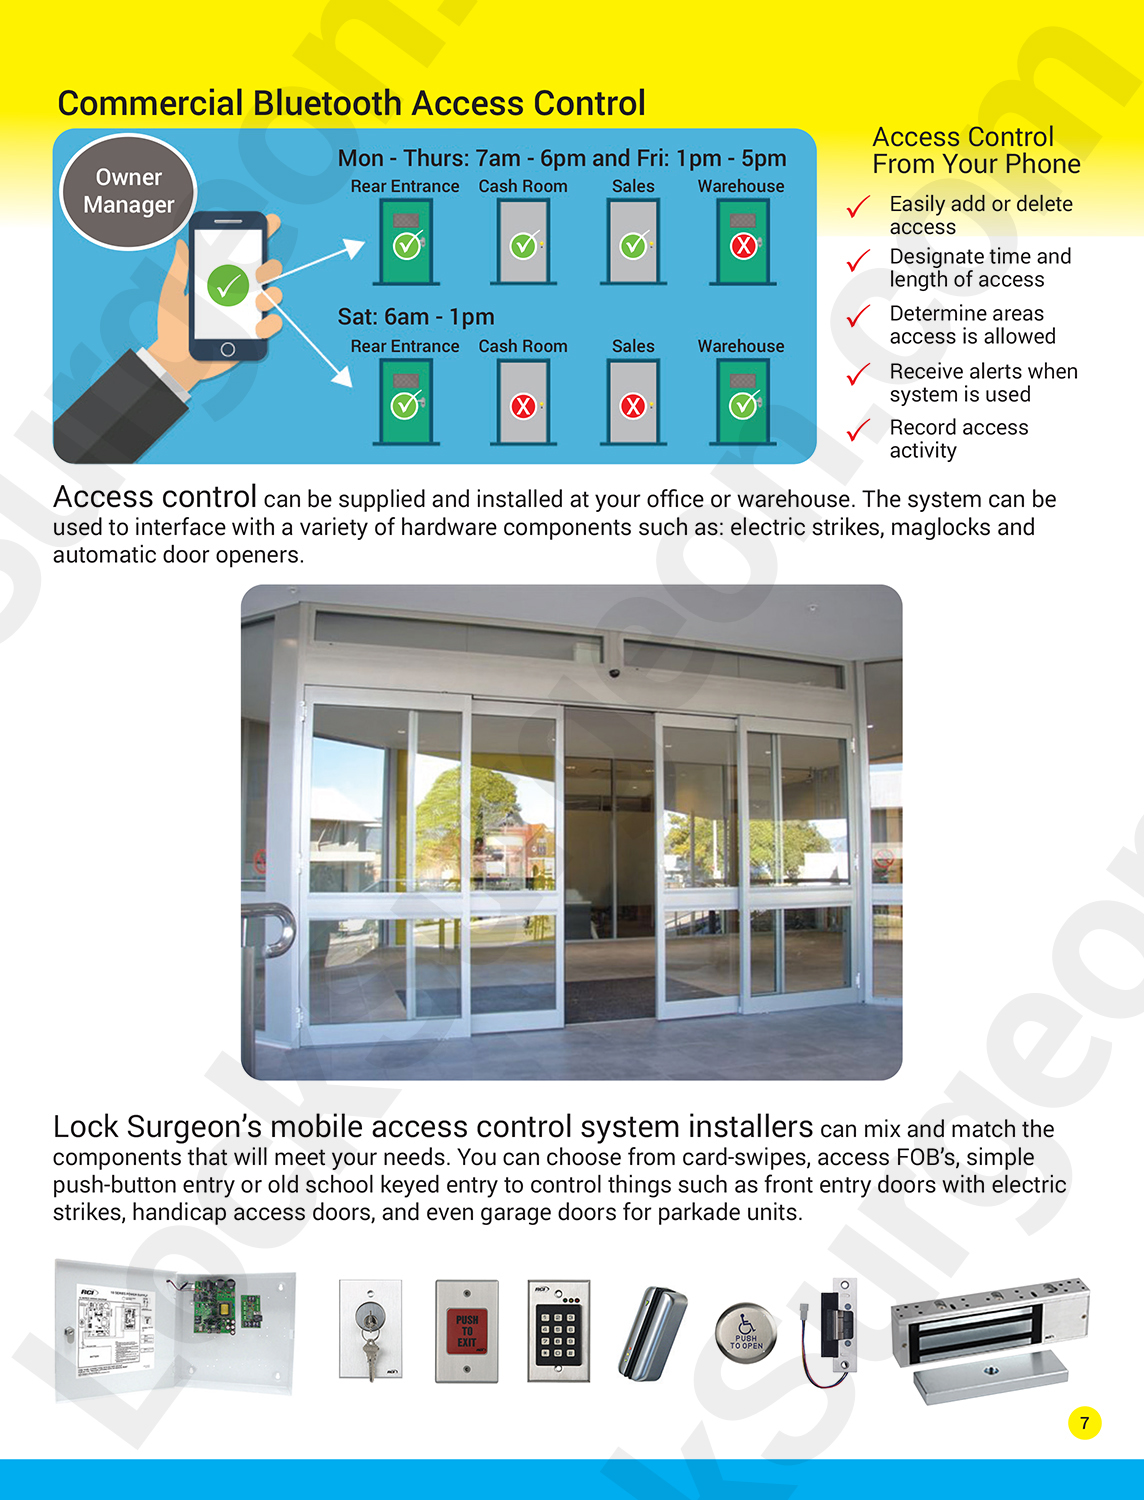 Lock Surgeon bluetooth access control system solutions for commercial industrial door entry access.